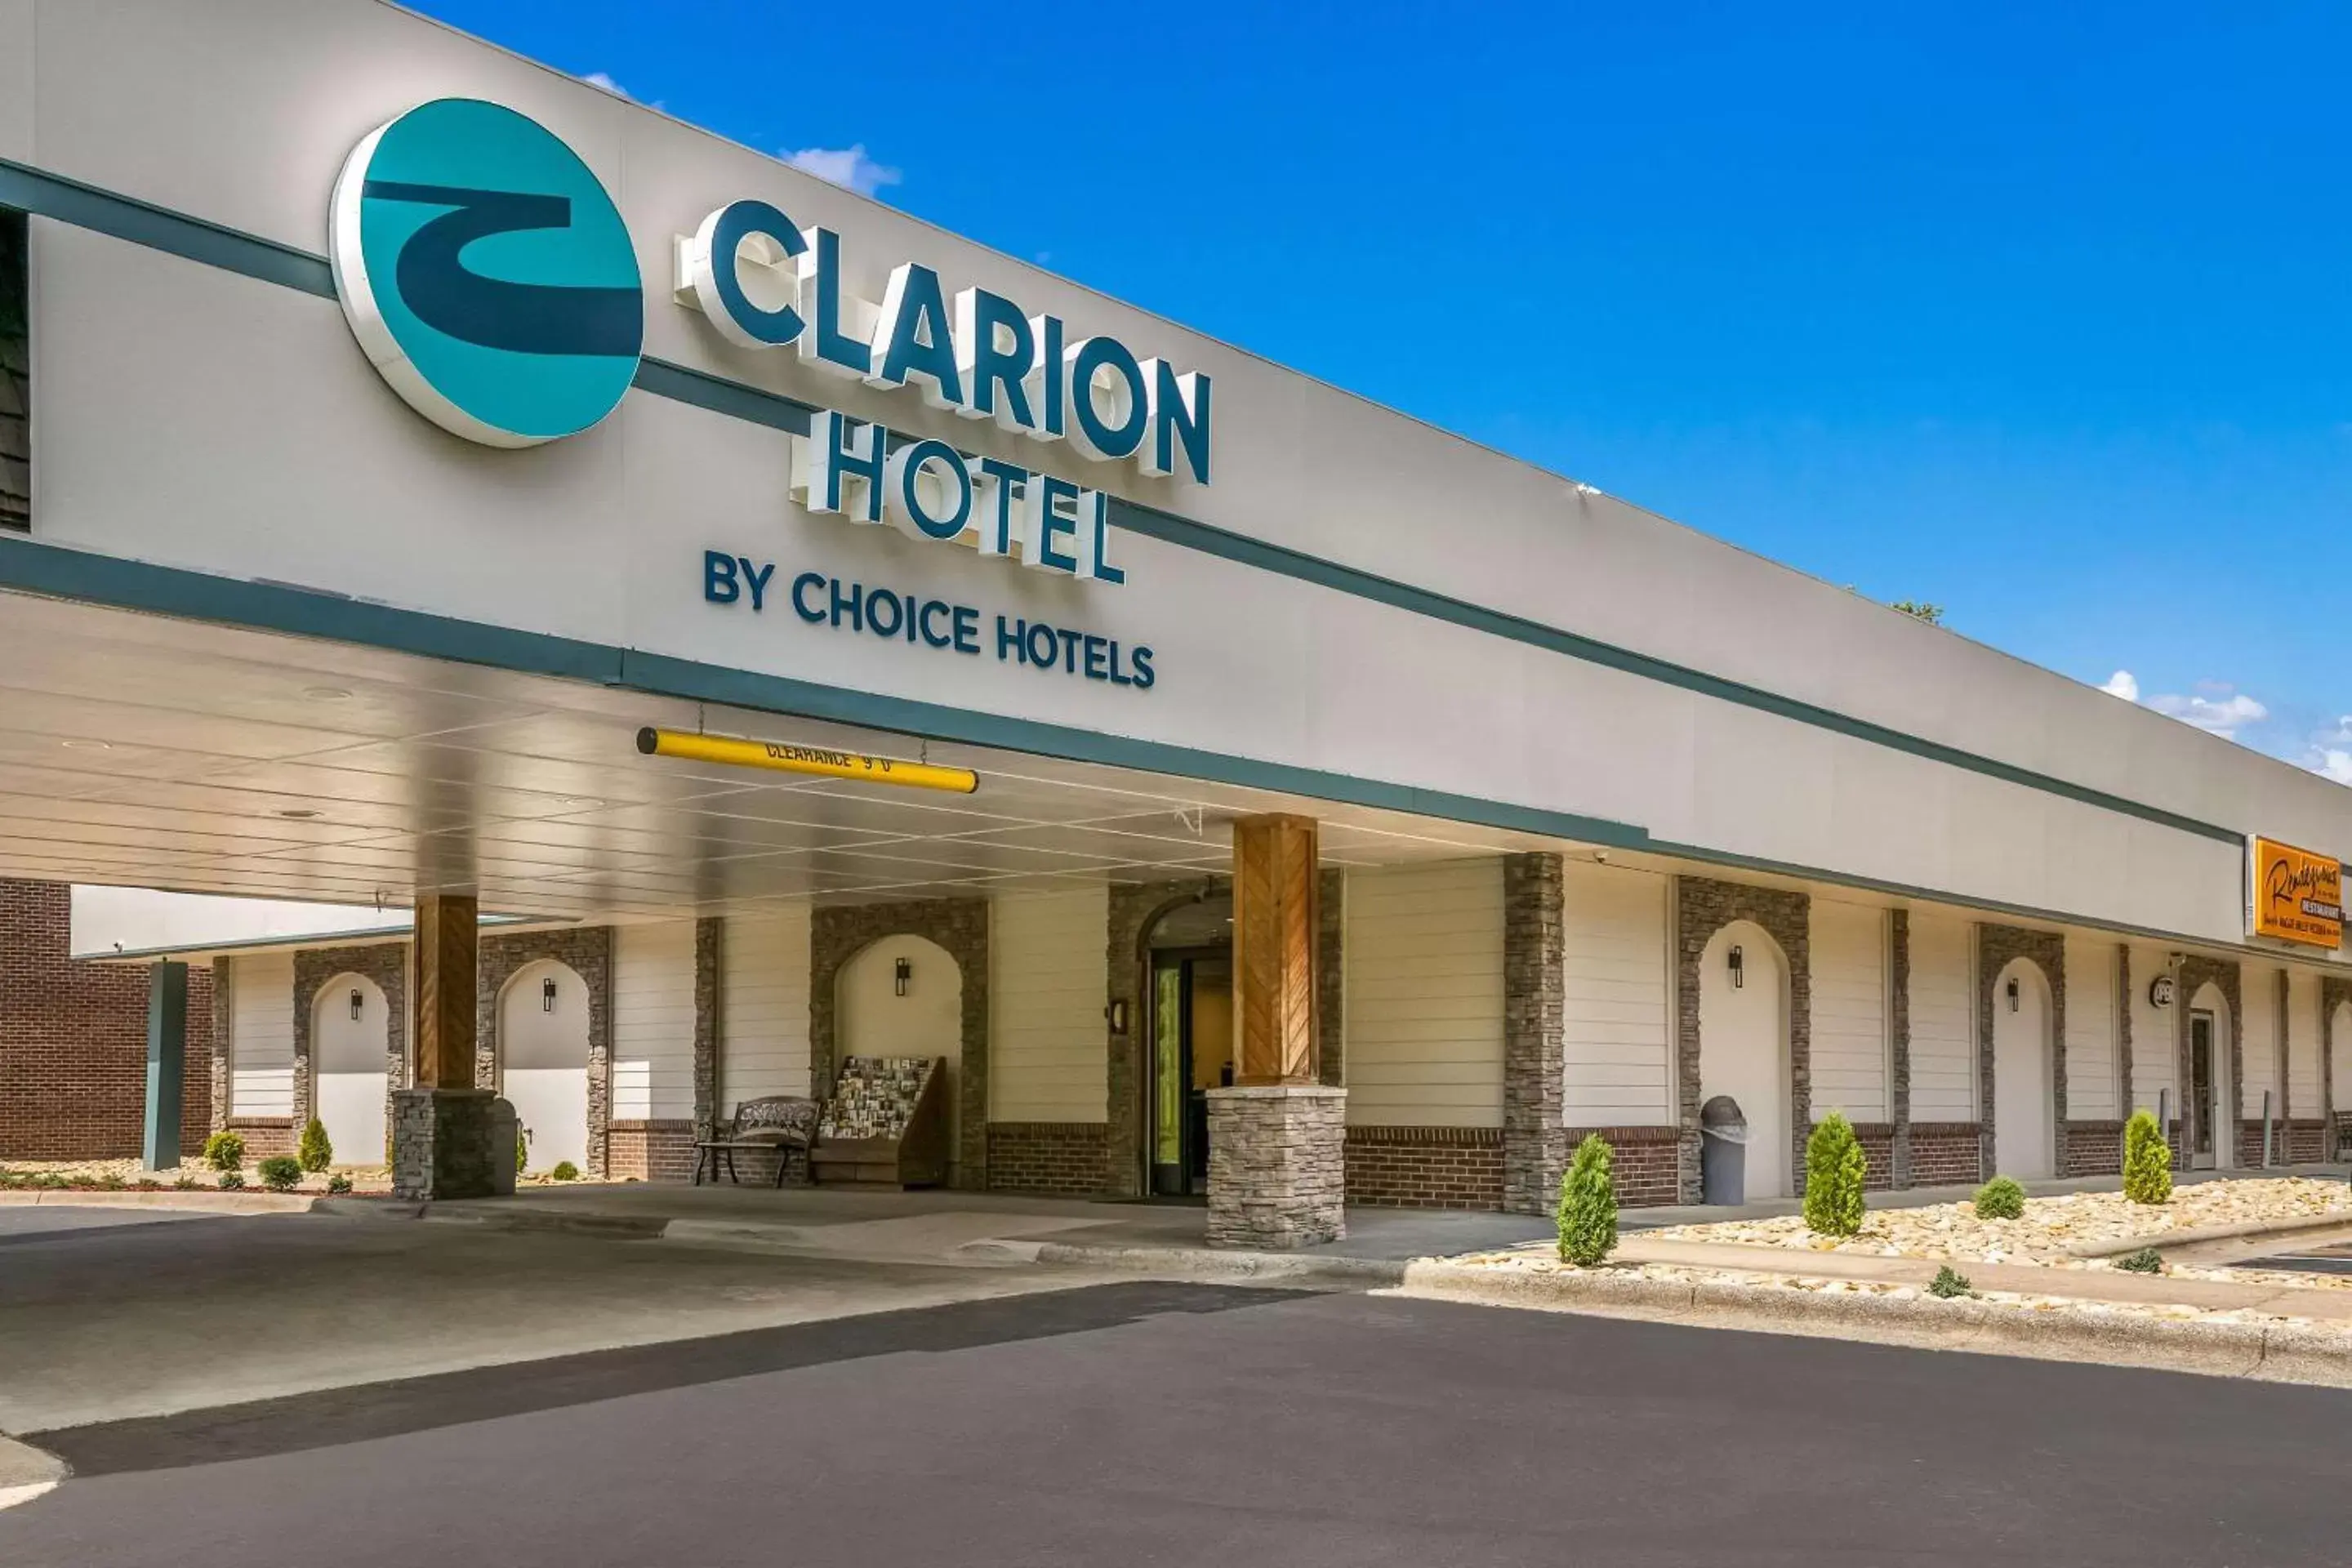 Property Building in Clarion Hotel Conference Center